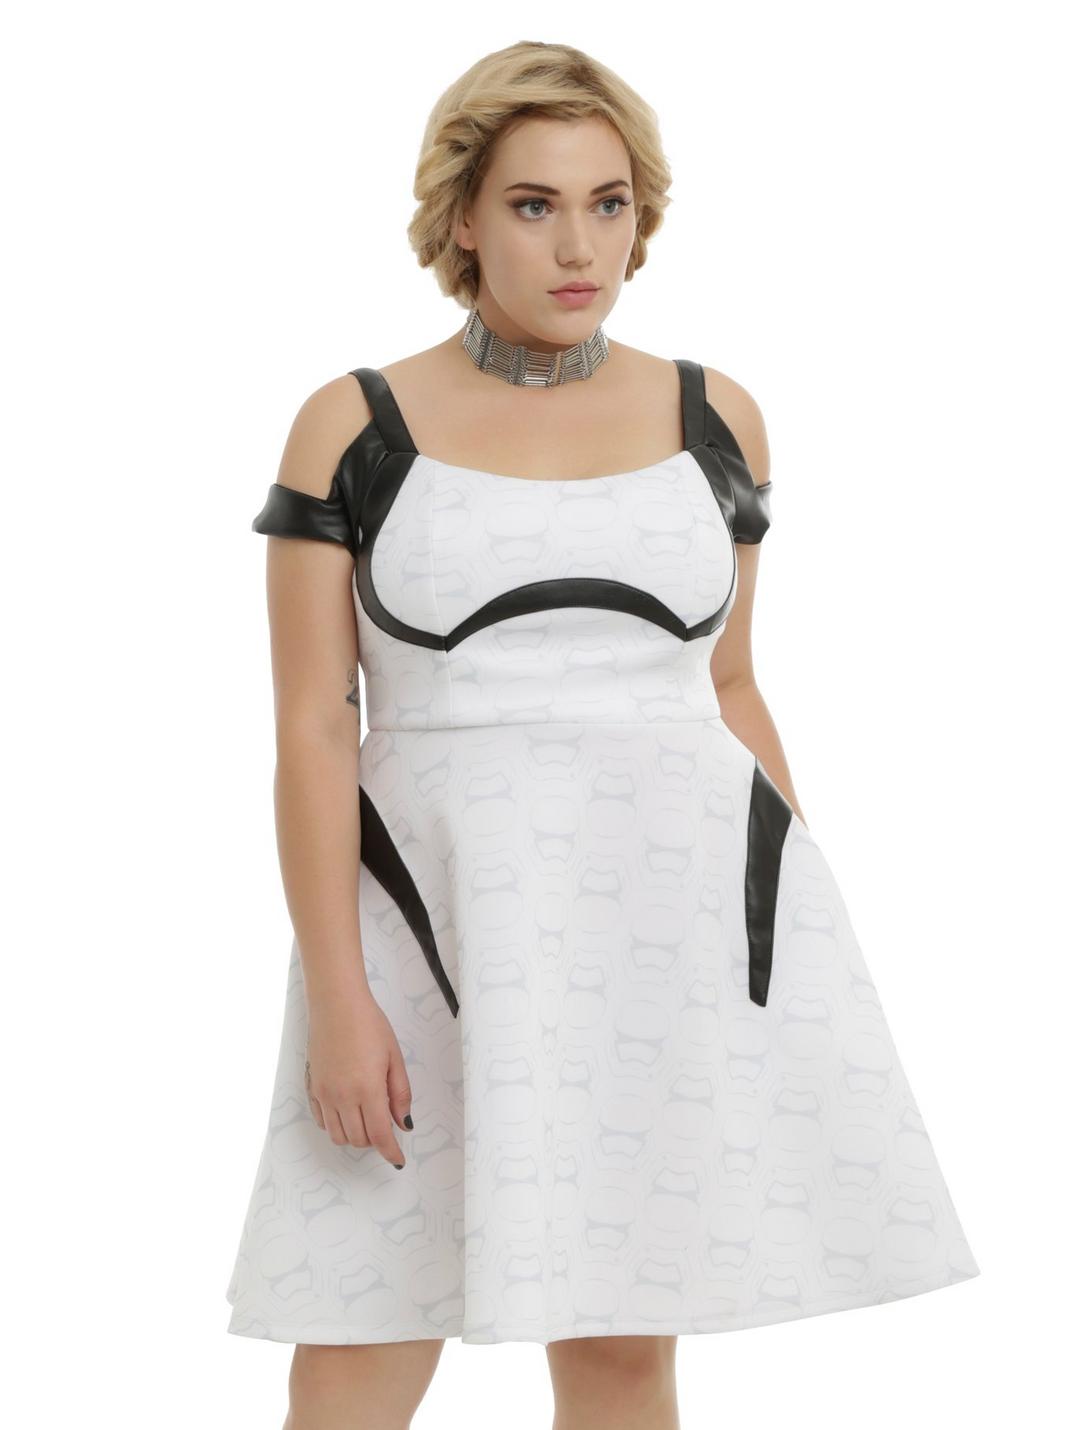 Star Wars By Her Universe Stormtrooper Dress Plus Size, WHITE, hi-res